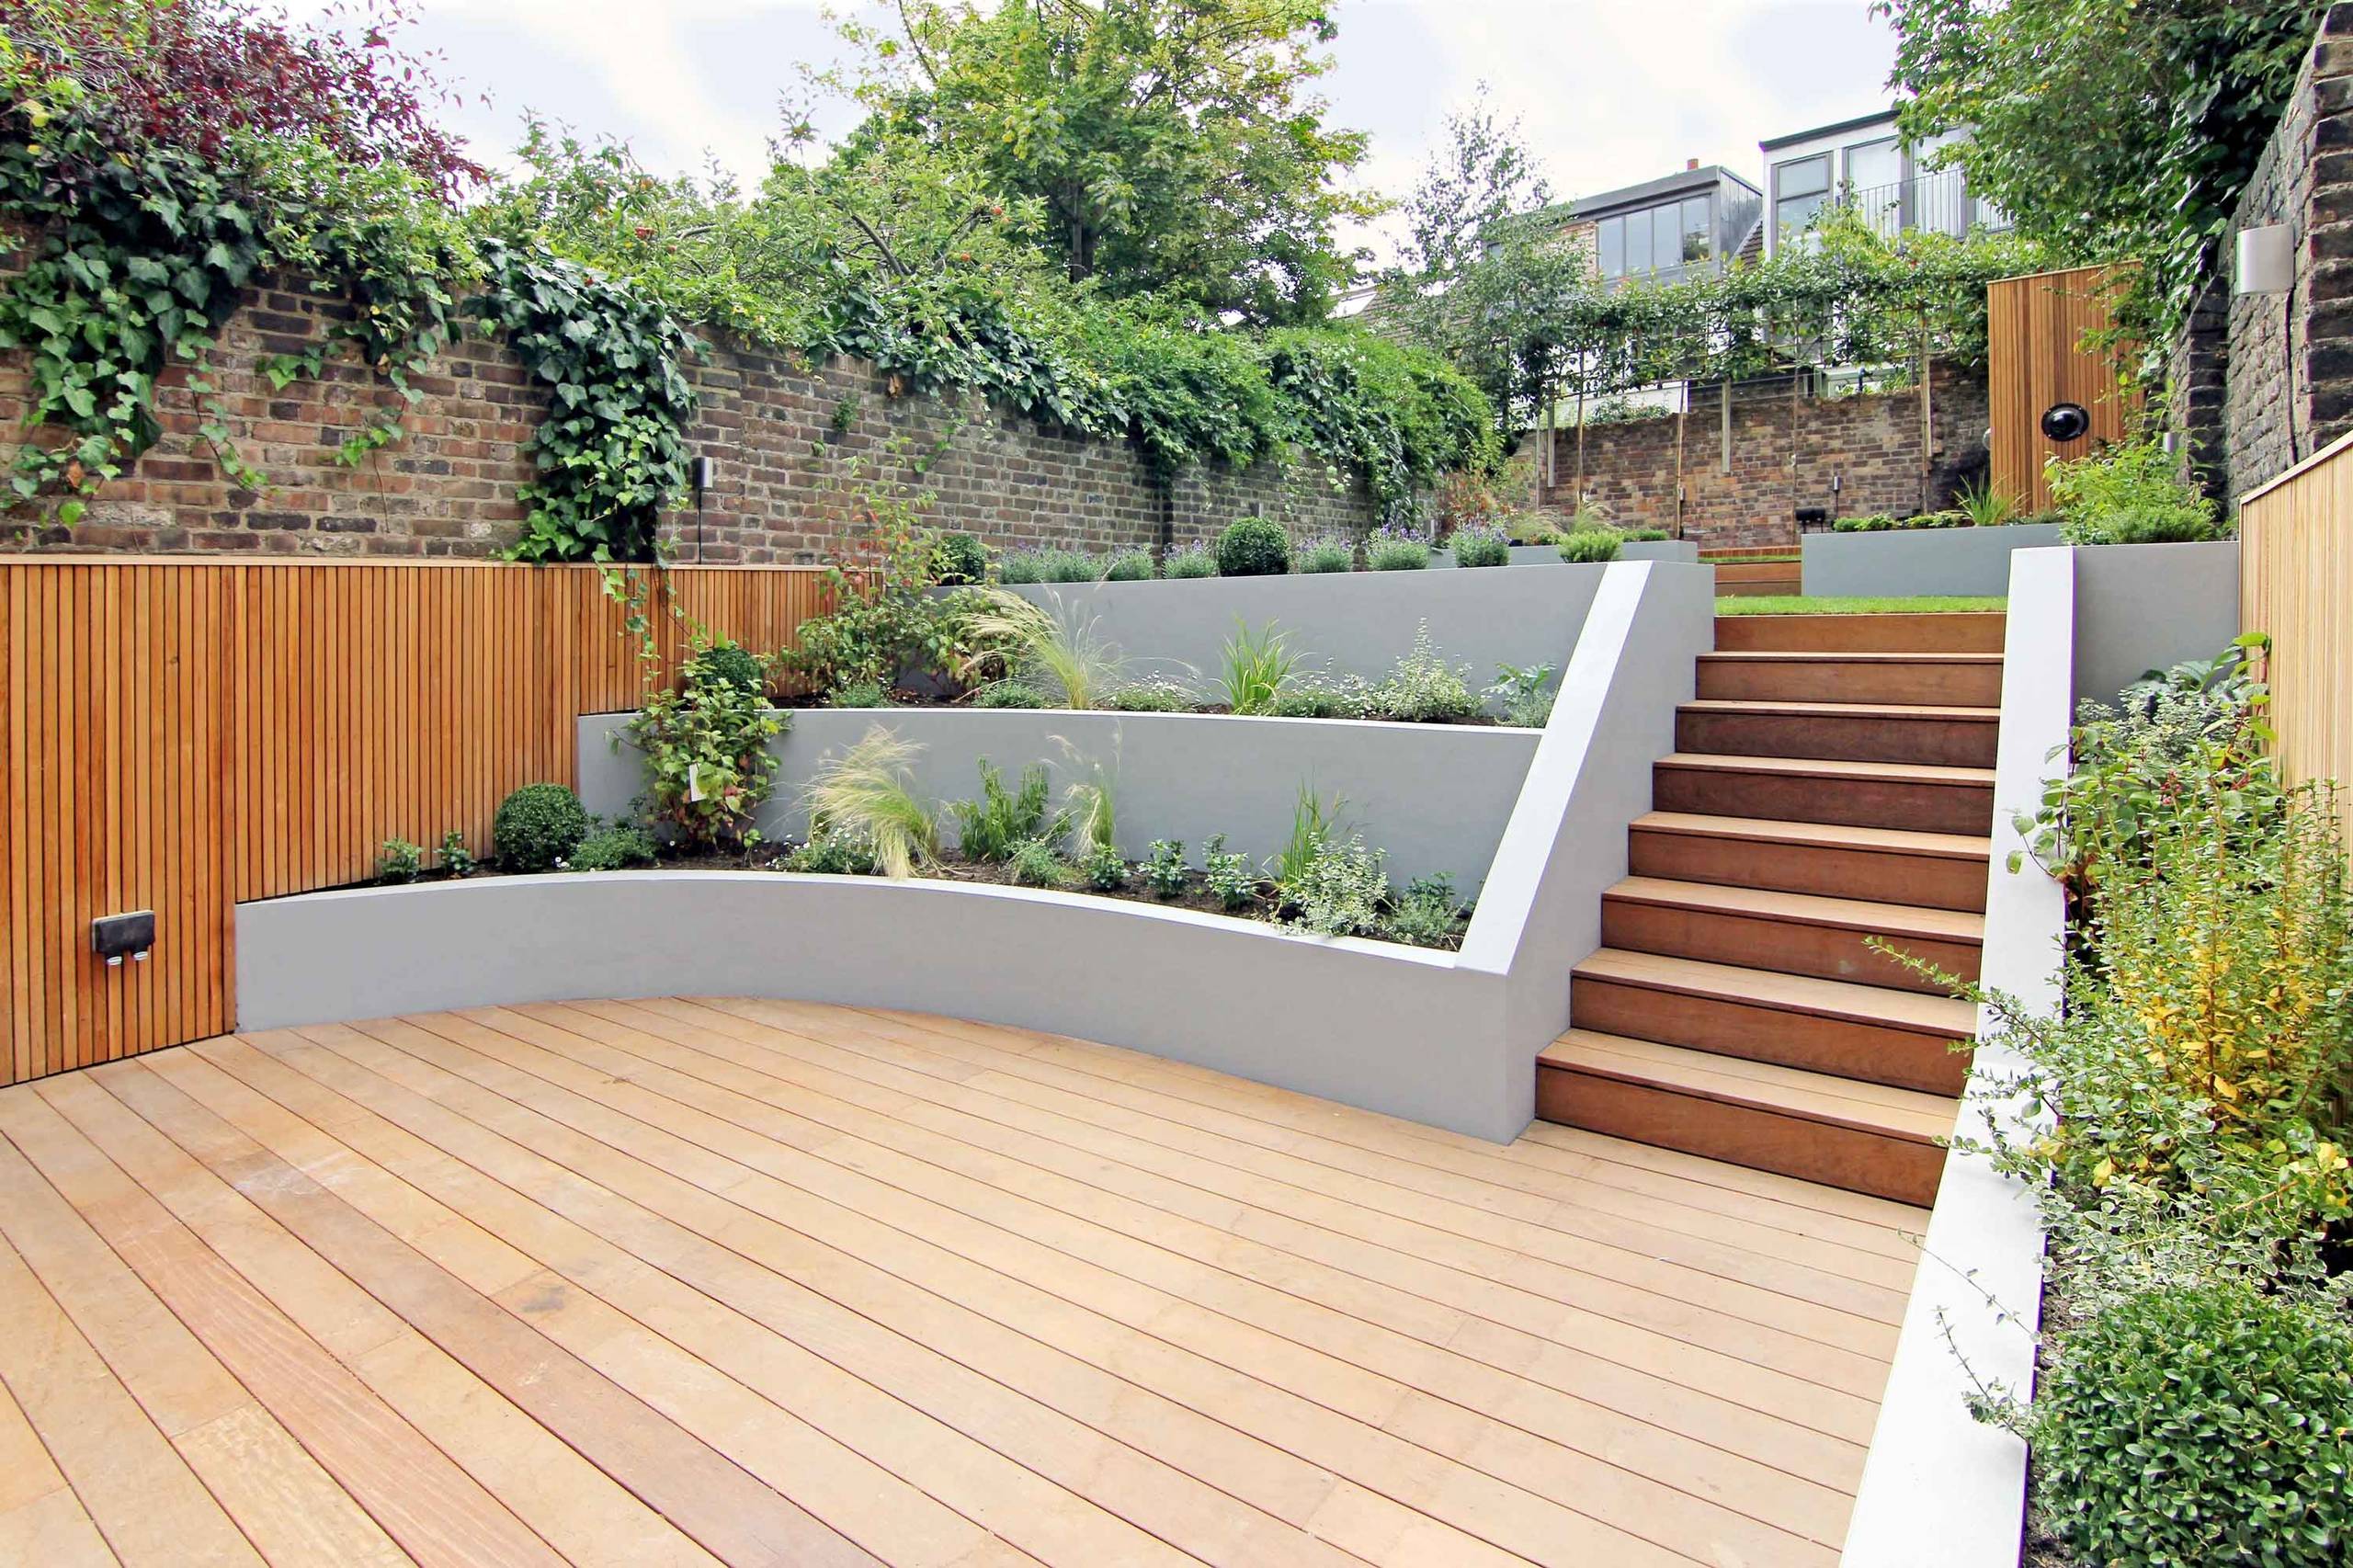 75 Retaining Wall with Decking Ideas You'll Love - March, 2022 | Houzz